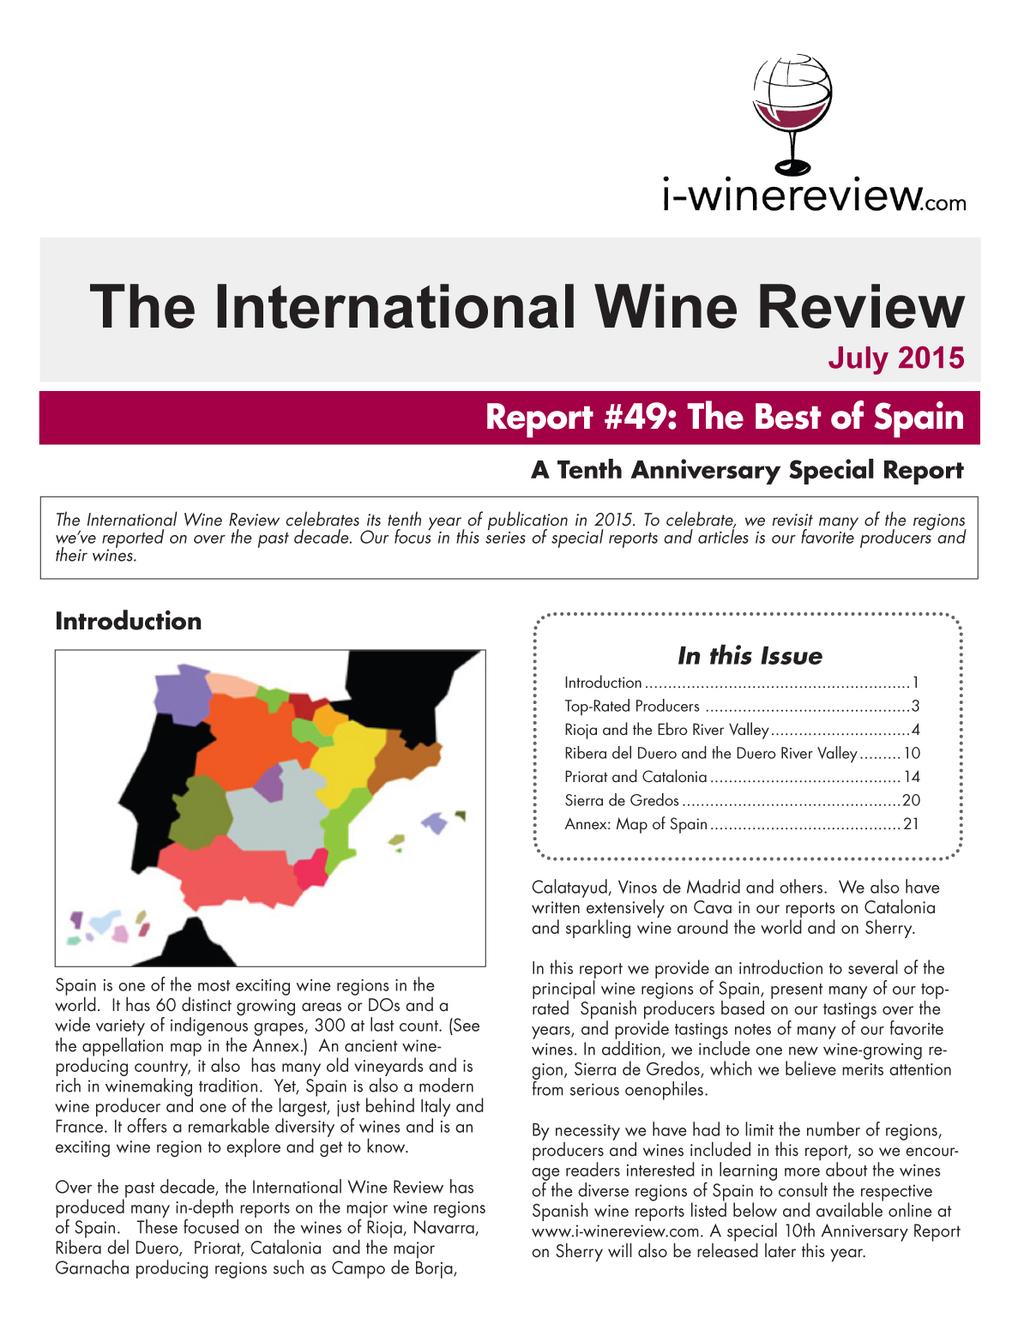 The international Wine Review Report #49: The Best of Spain